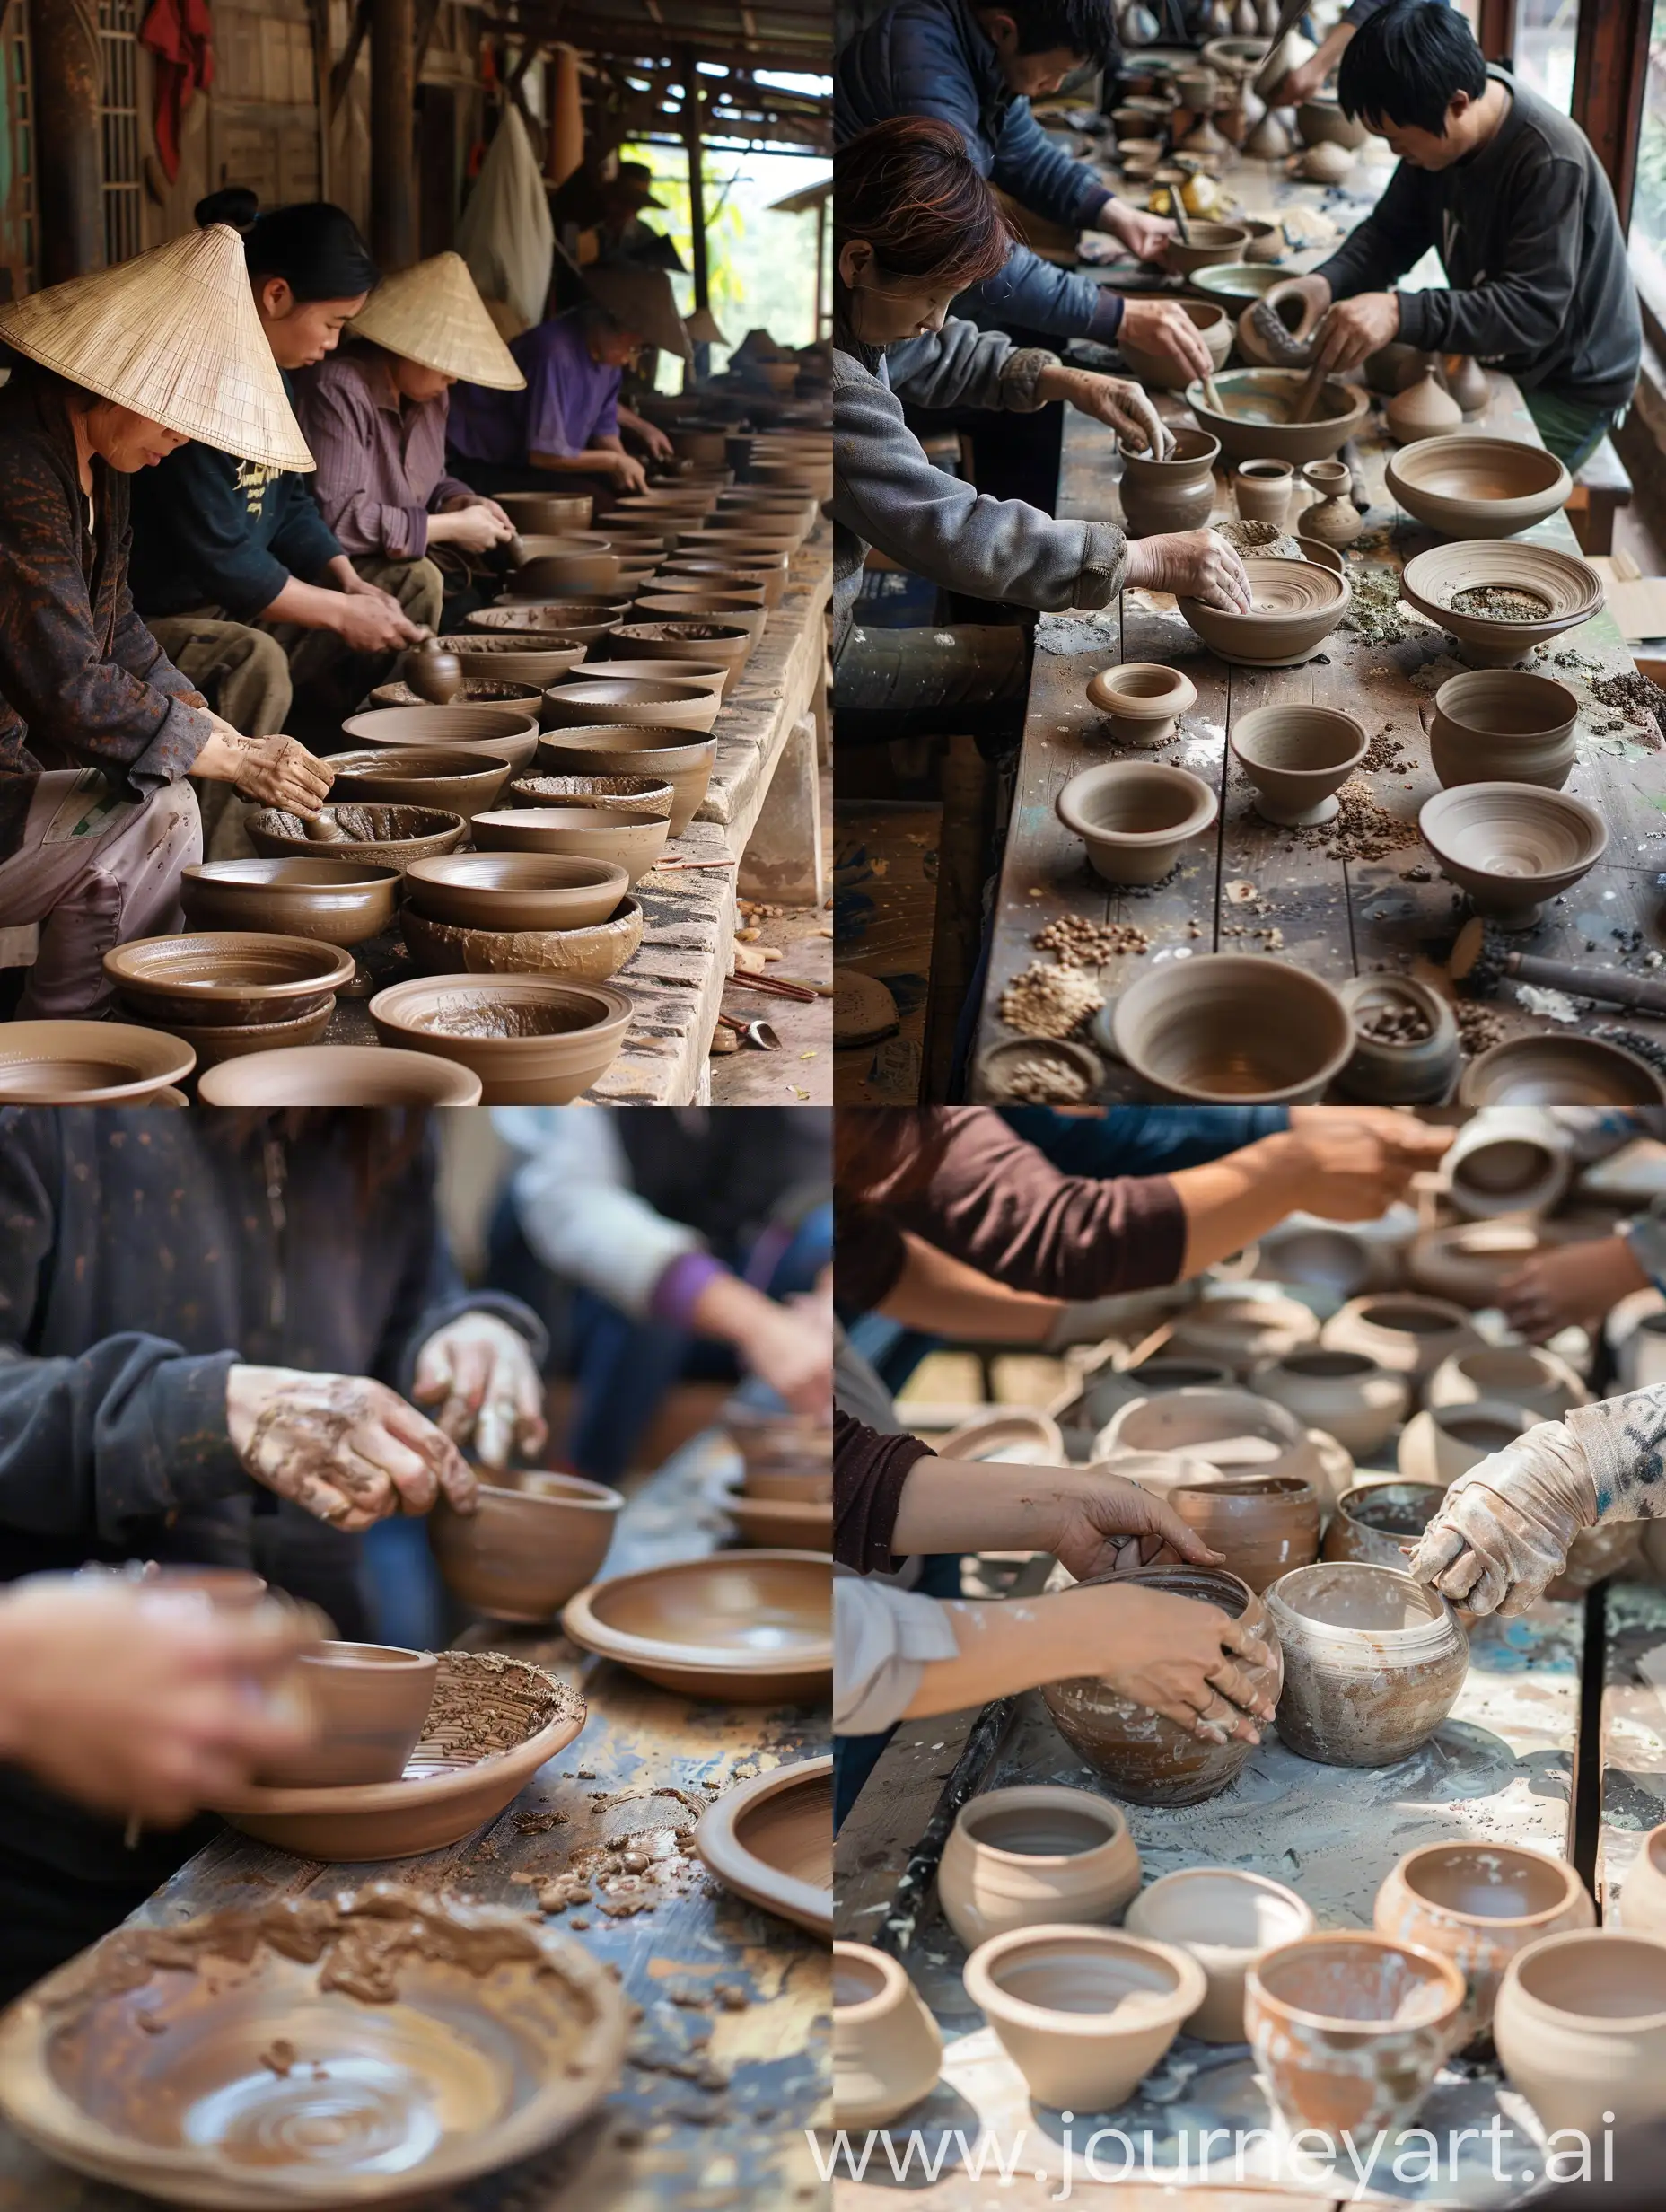 Artisans-Crafting-Pottery-Creative-Process-in-Action